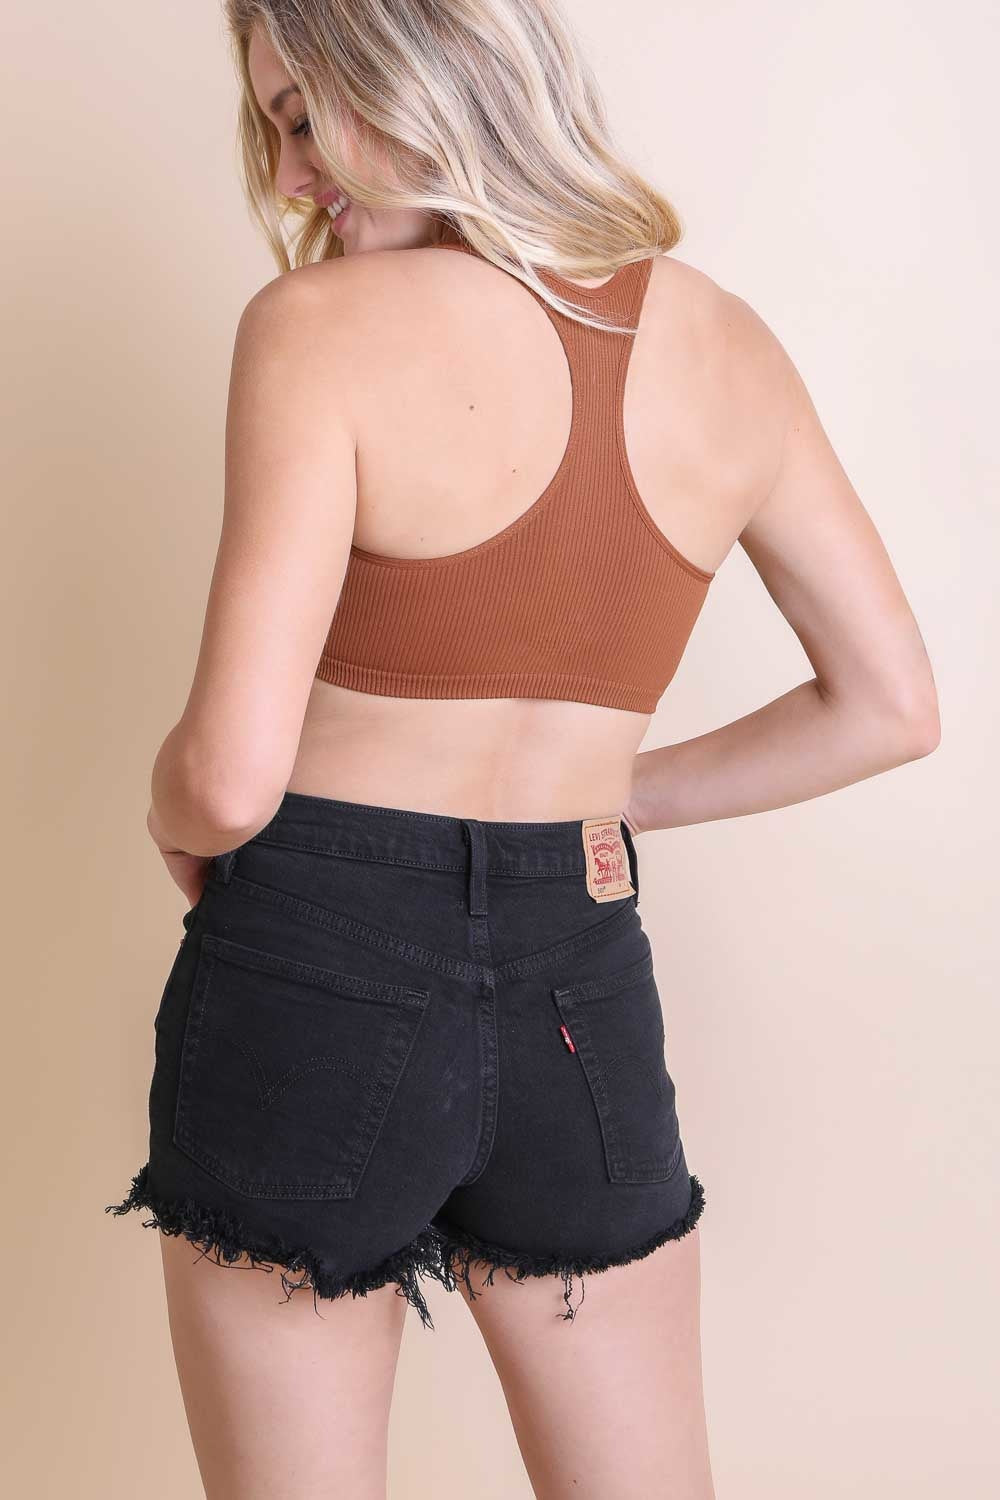 Leto Collection - Ribbed Racerback Bralette $18 – Thank you